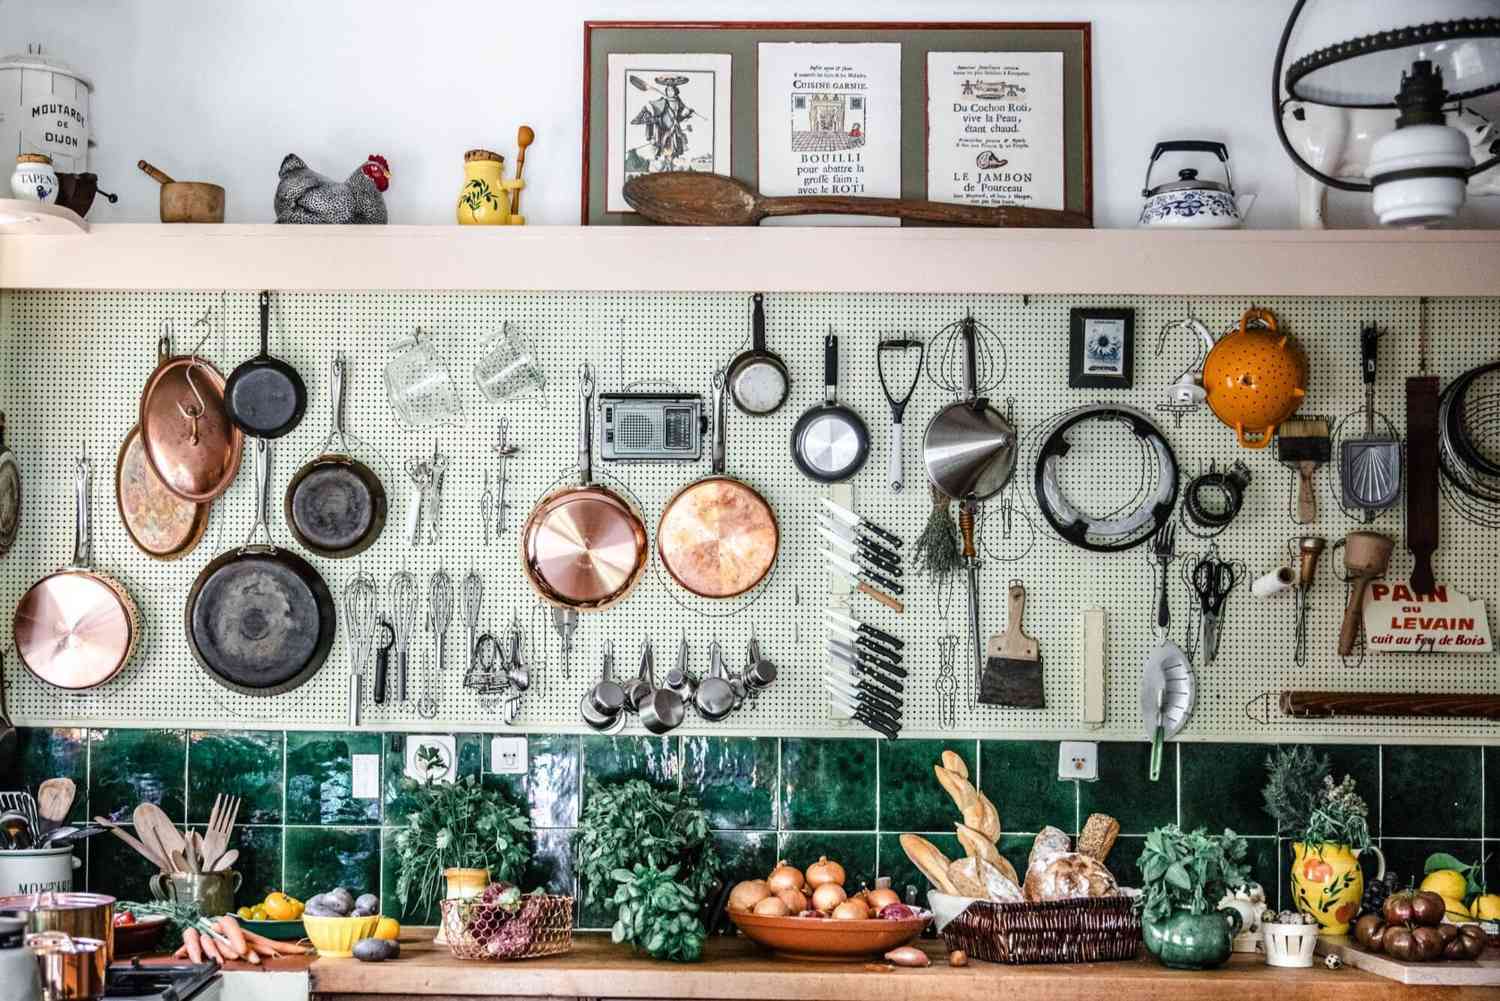 Julia Child's famous kitchen peg board filled with pots, tools, utensils, pans, and a bevy of produce on the counter below